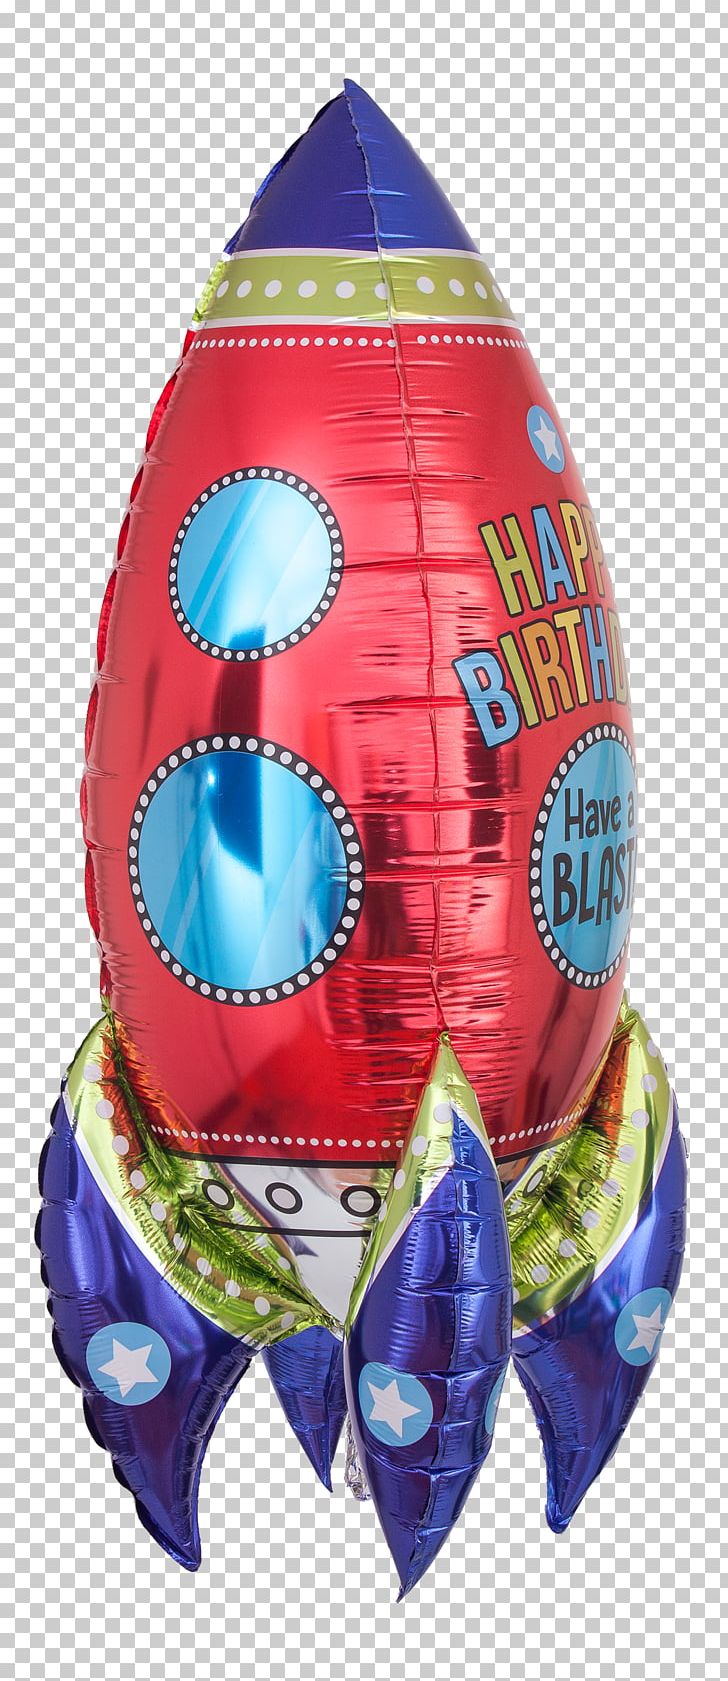 Toy Balloon Balloon Rocket Birthday PNG, Clipart, Balloon, Balloon Rocket, Birthday, Cobalt Blue, Gas Balloon Free PNG Download